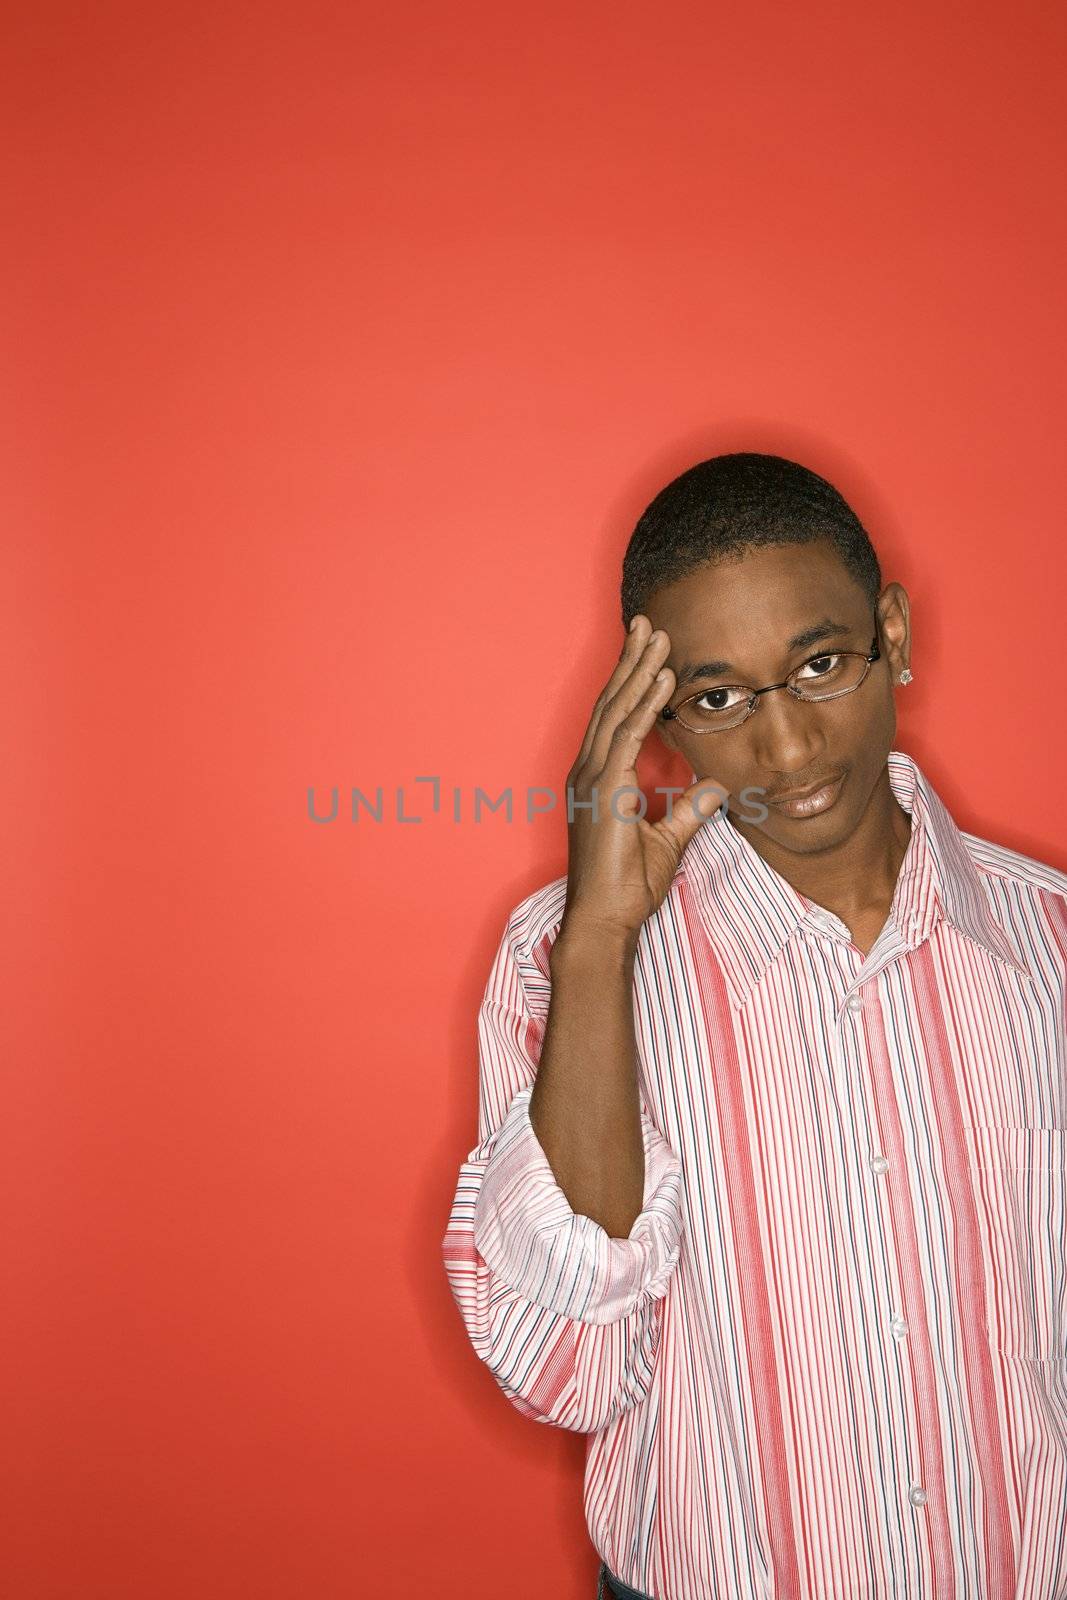 Portrait of African-American teen boy with glasses and hand on forehead against red background.